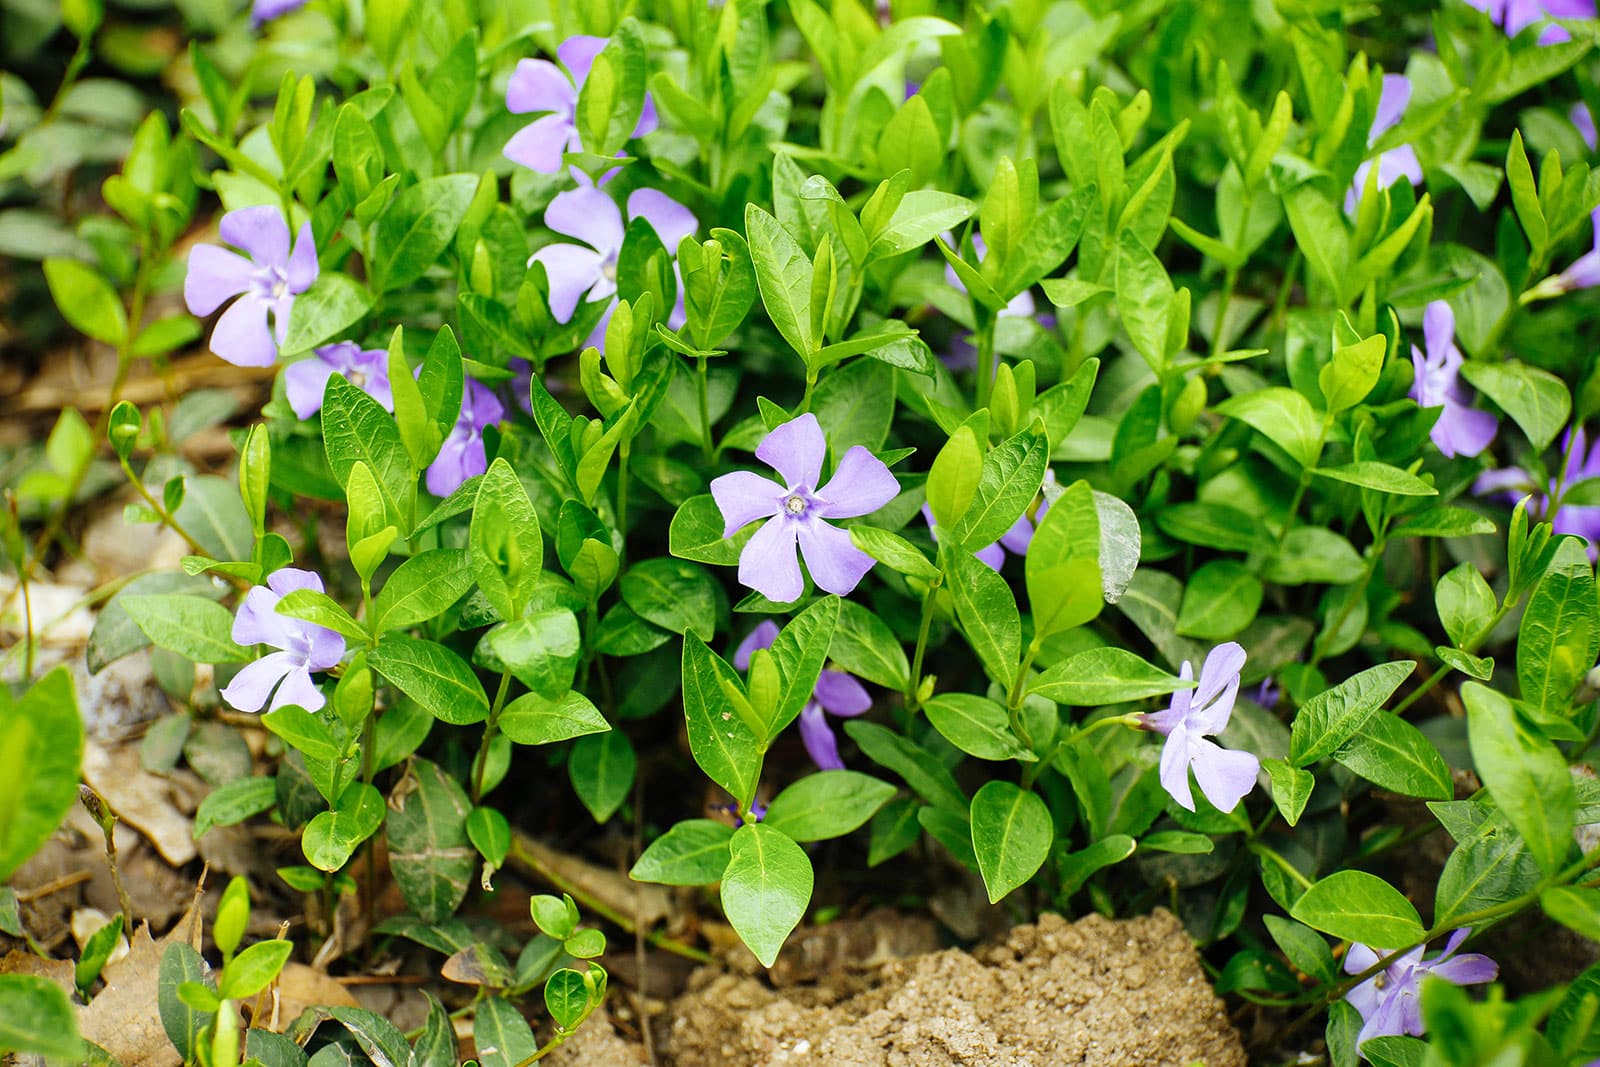 Dwarf periwinkle ground cover with purple flowers